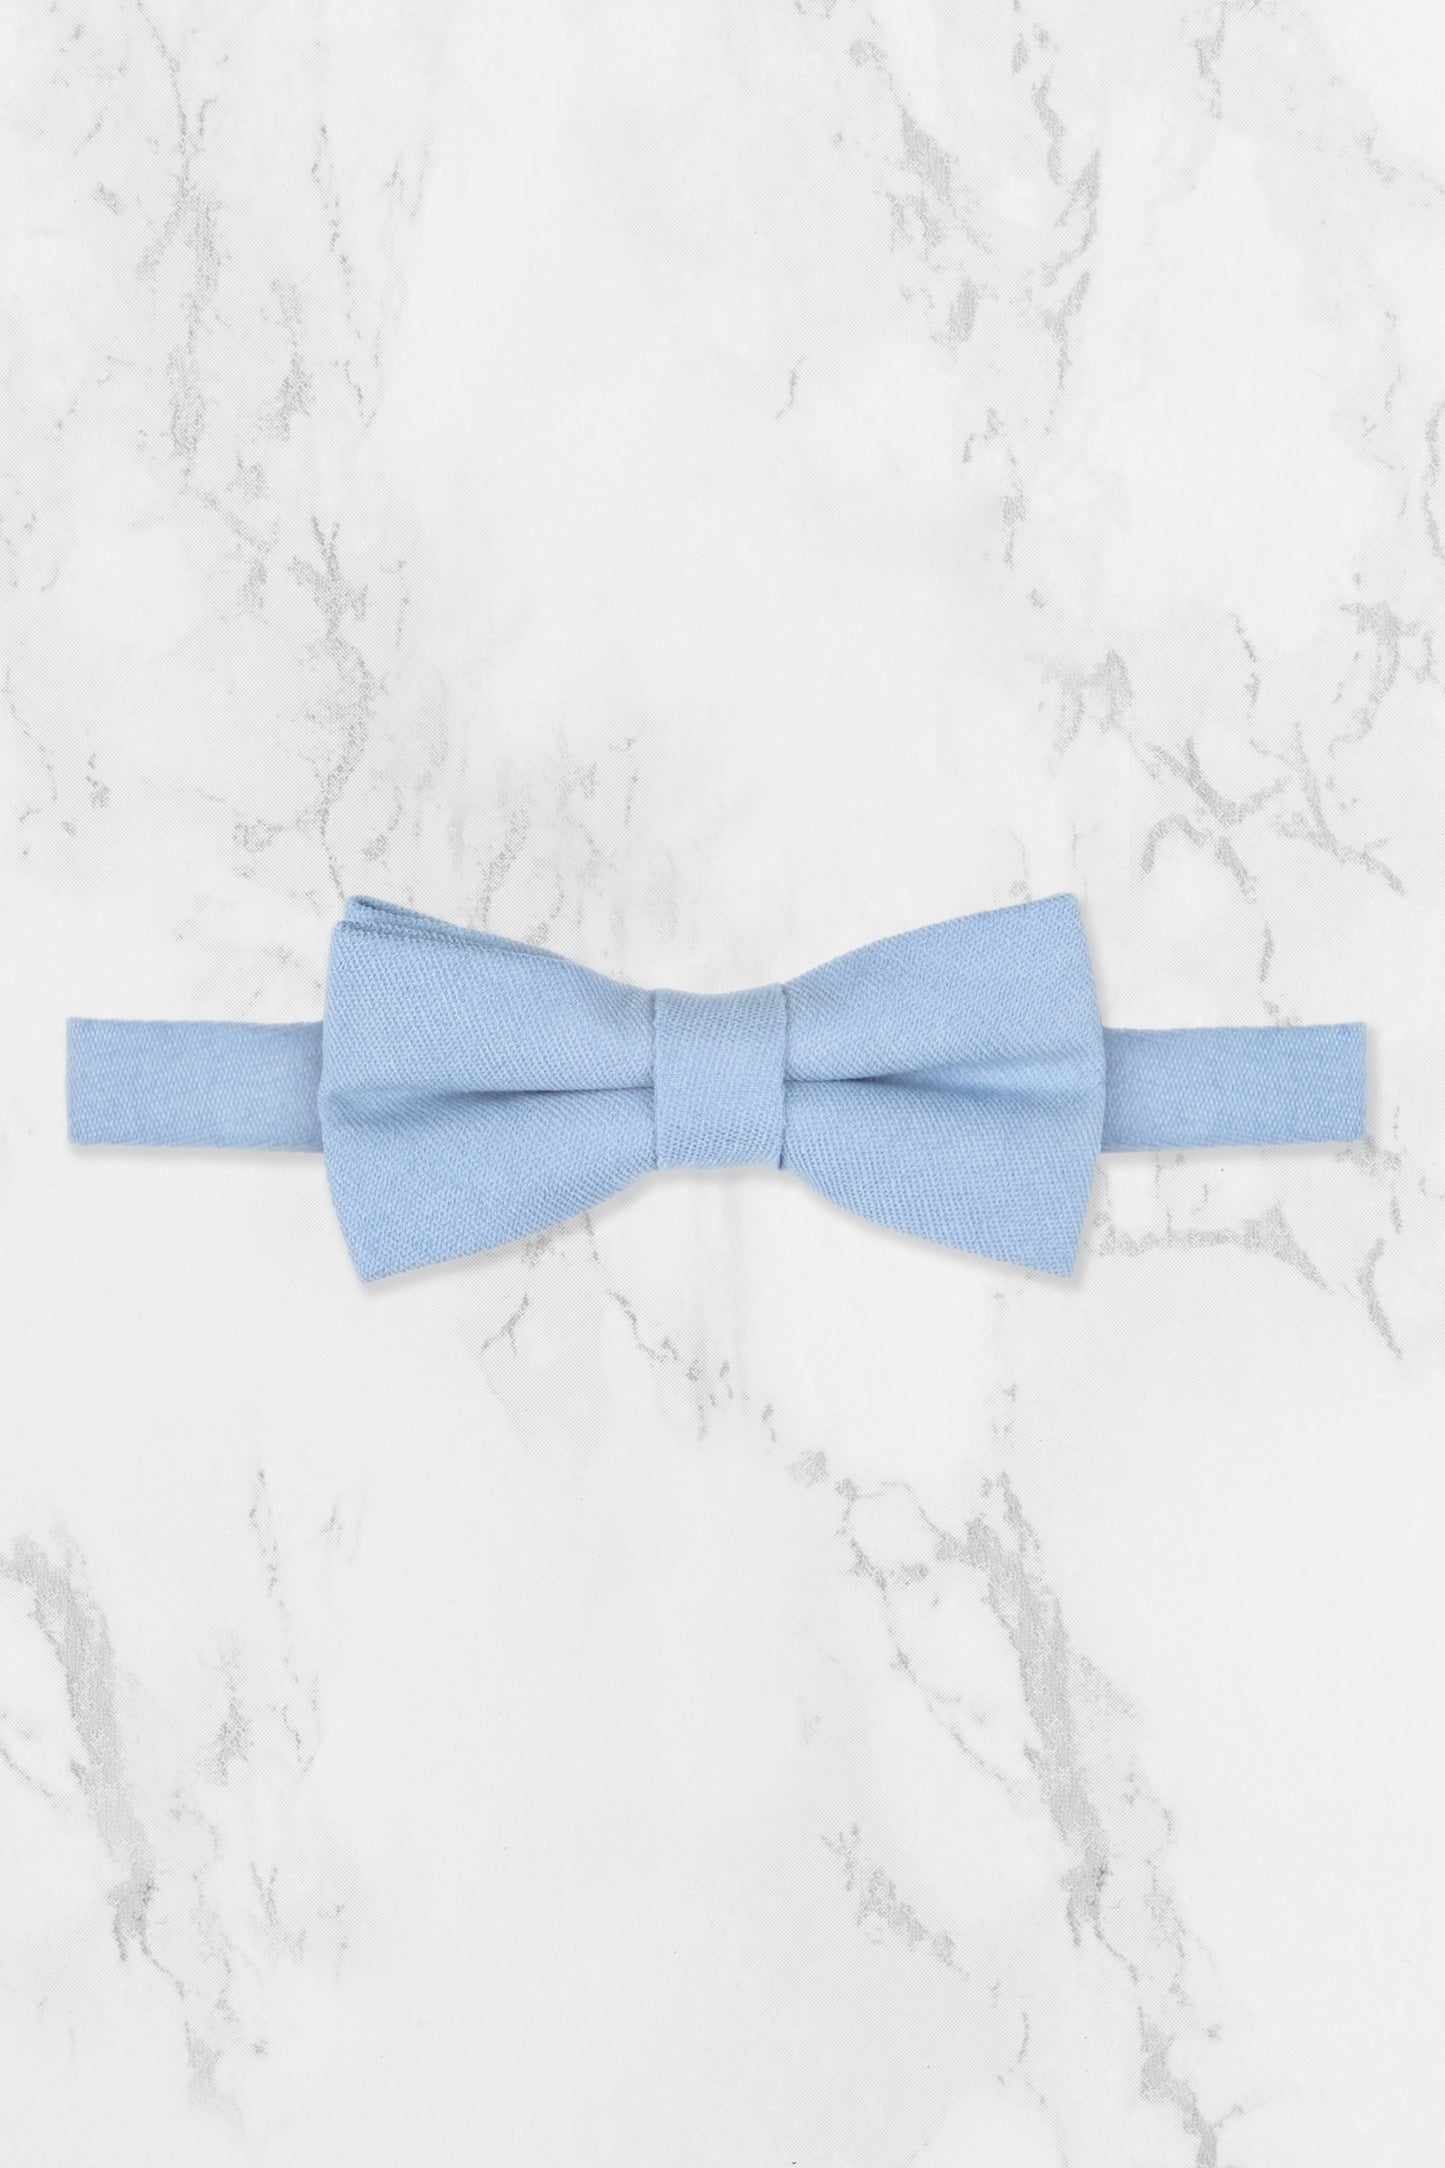 100% Brushed Cotton Suede Bow Tie - Blue